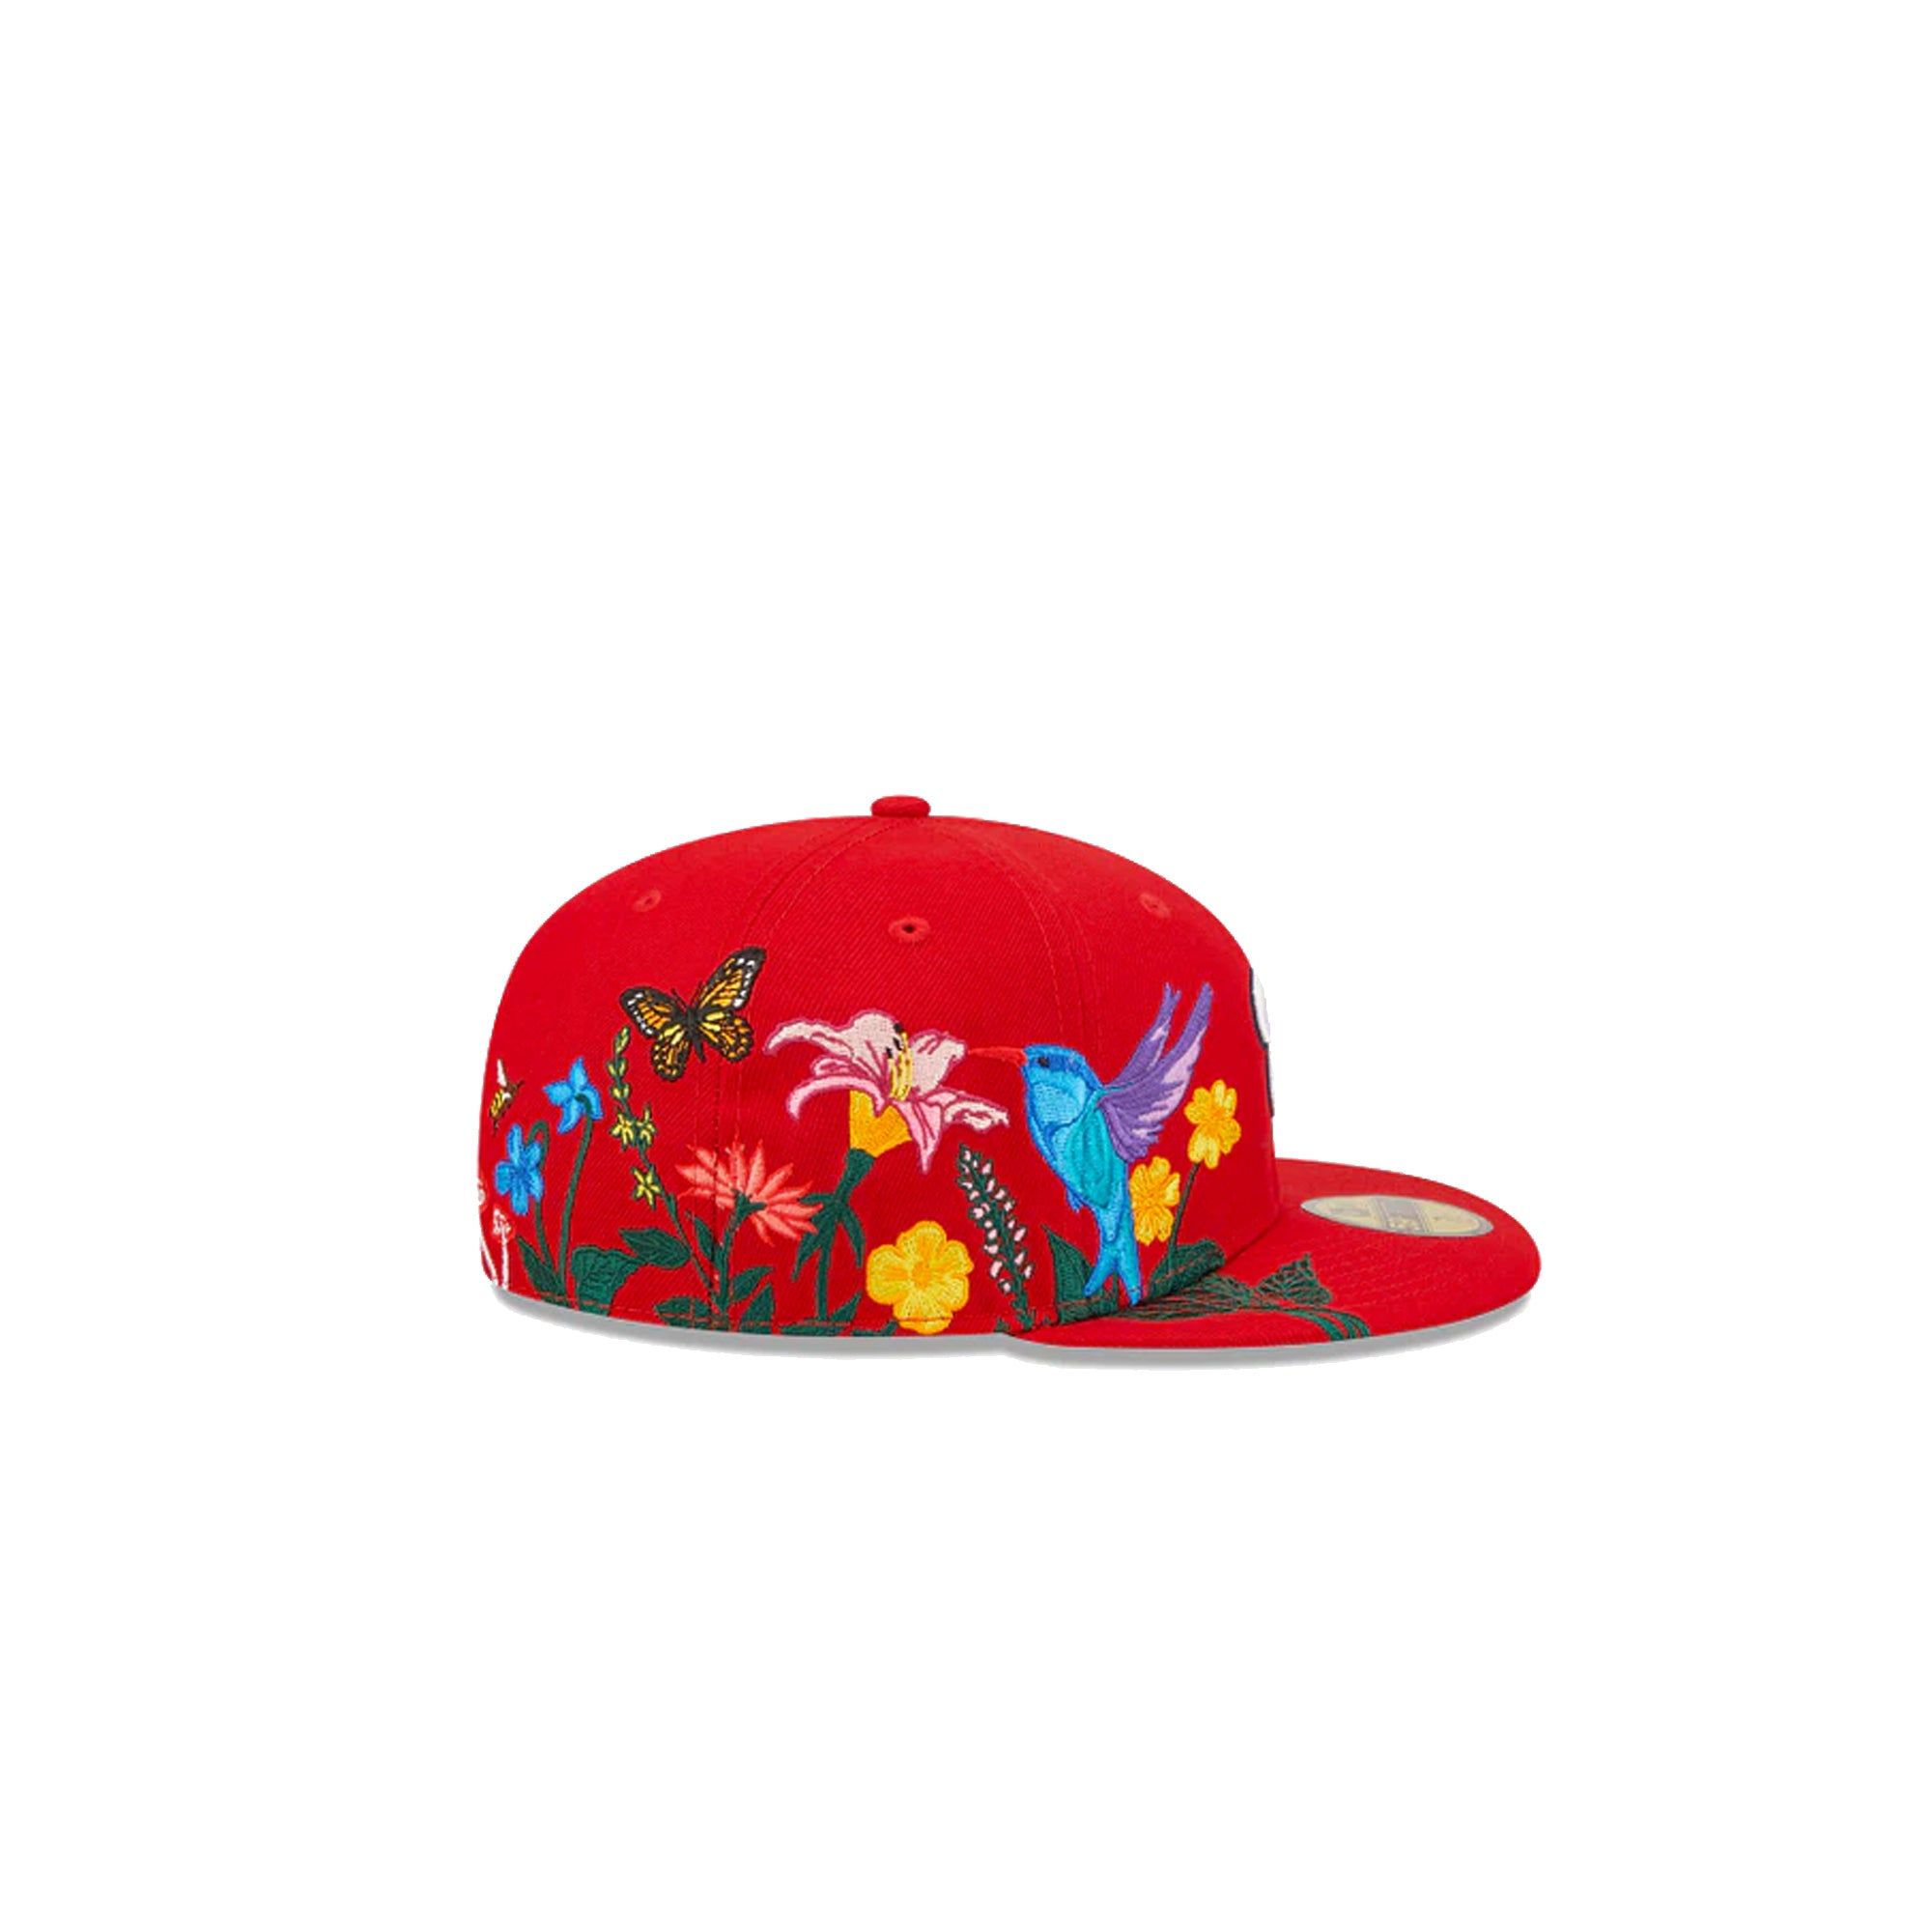 Washington Nationals New Era Sidesplit 59FIFTY Fitted Hat - Red